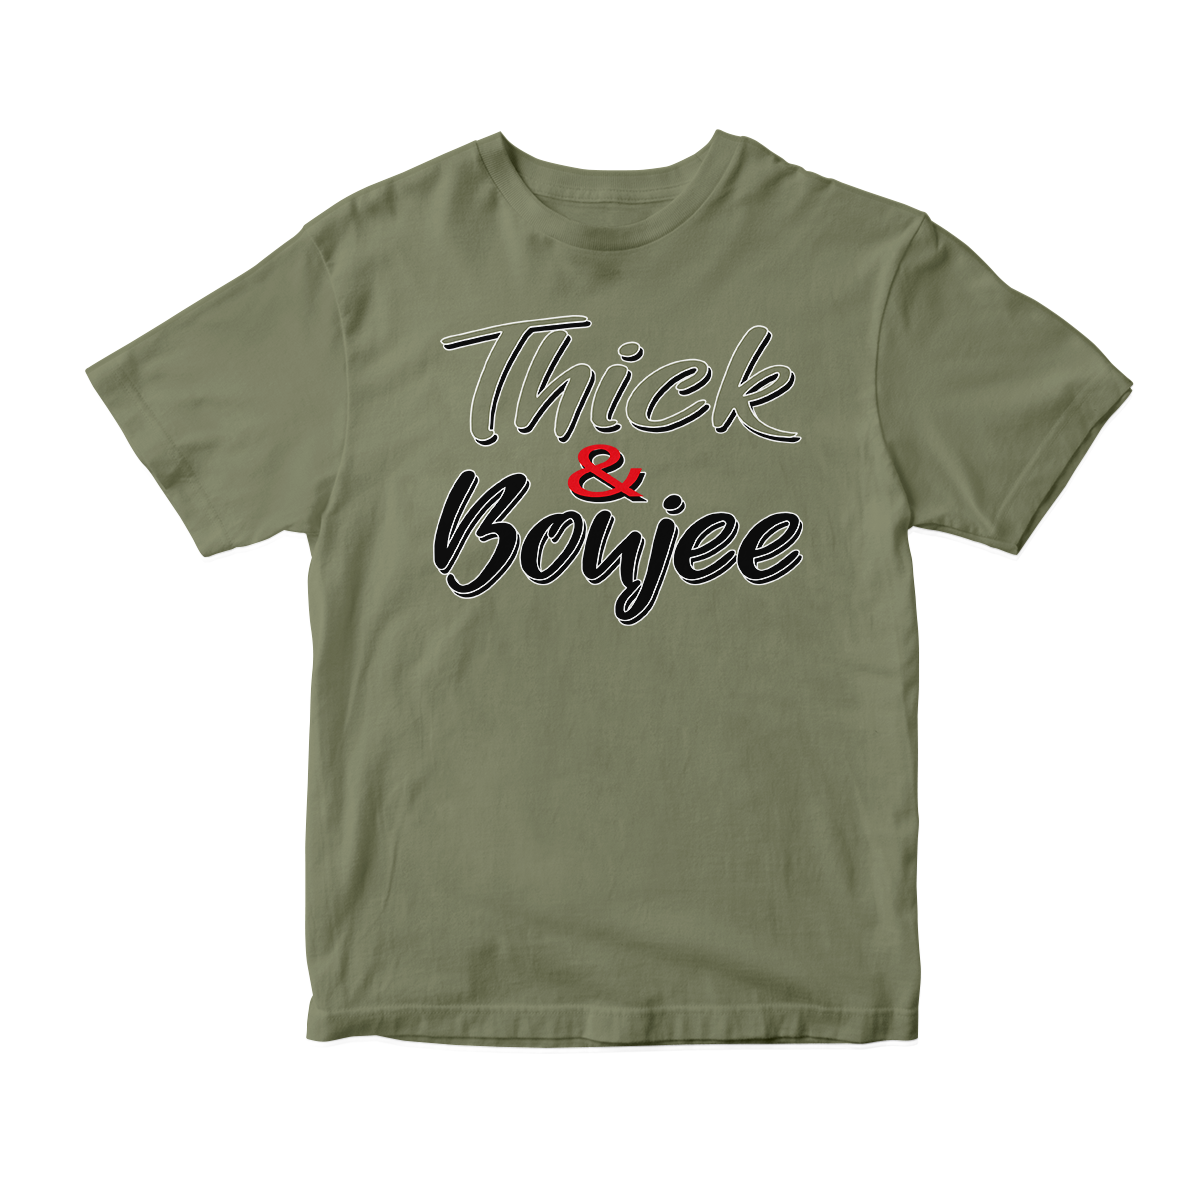 'Thick & Boujee' in Medium Olive CW Short Sleeve Tee